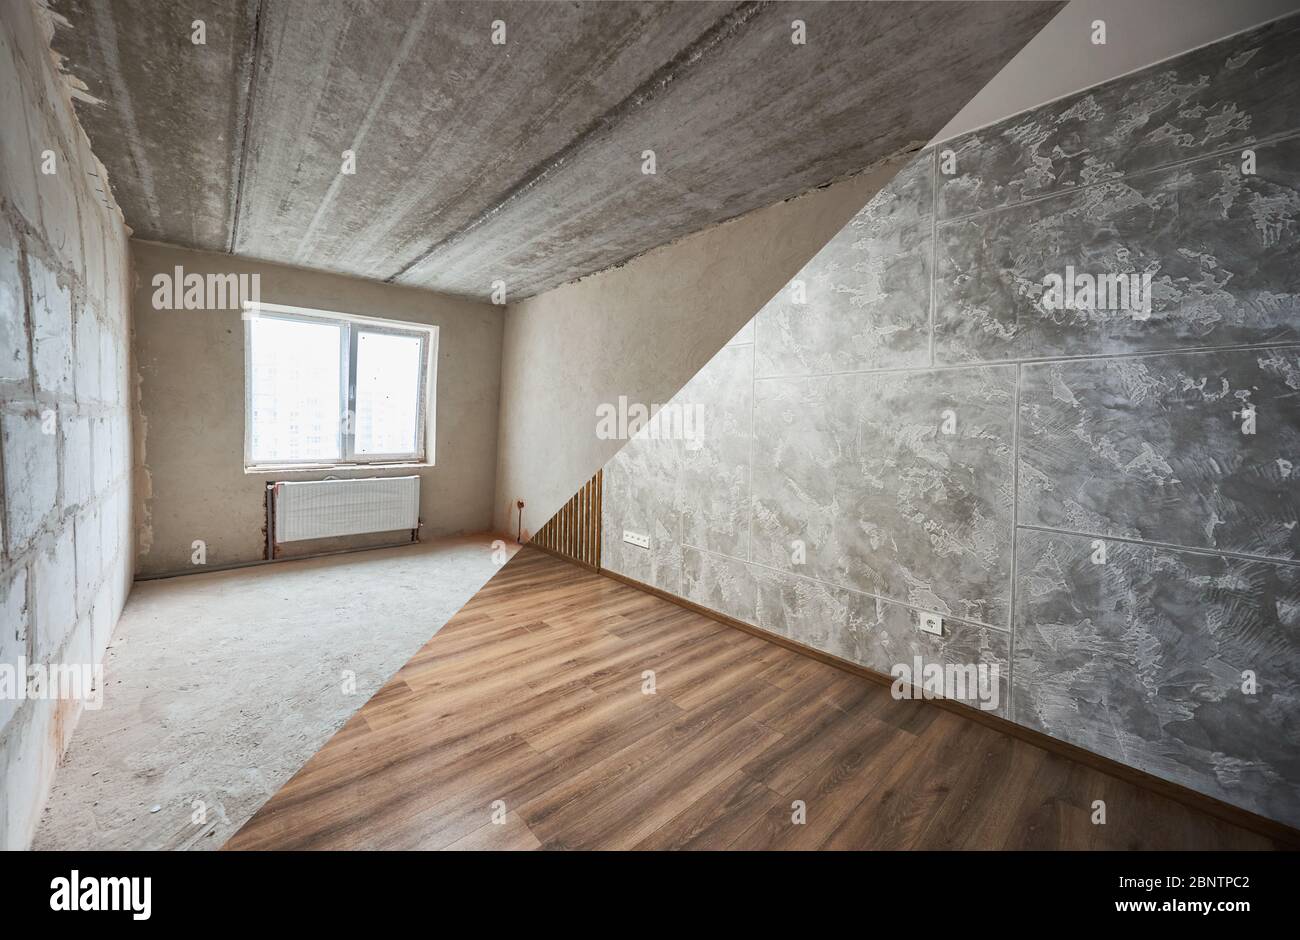 Empty room with large plastic window and heating radiators before and after refurbishment. Comparison of old room and new renovated place with parquet and gray walls. Concept of home renovation. Stock Photo